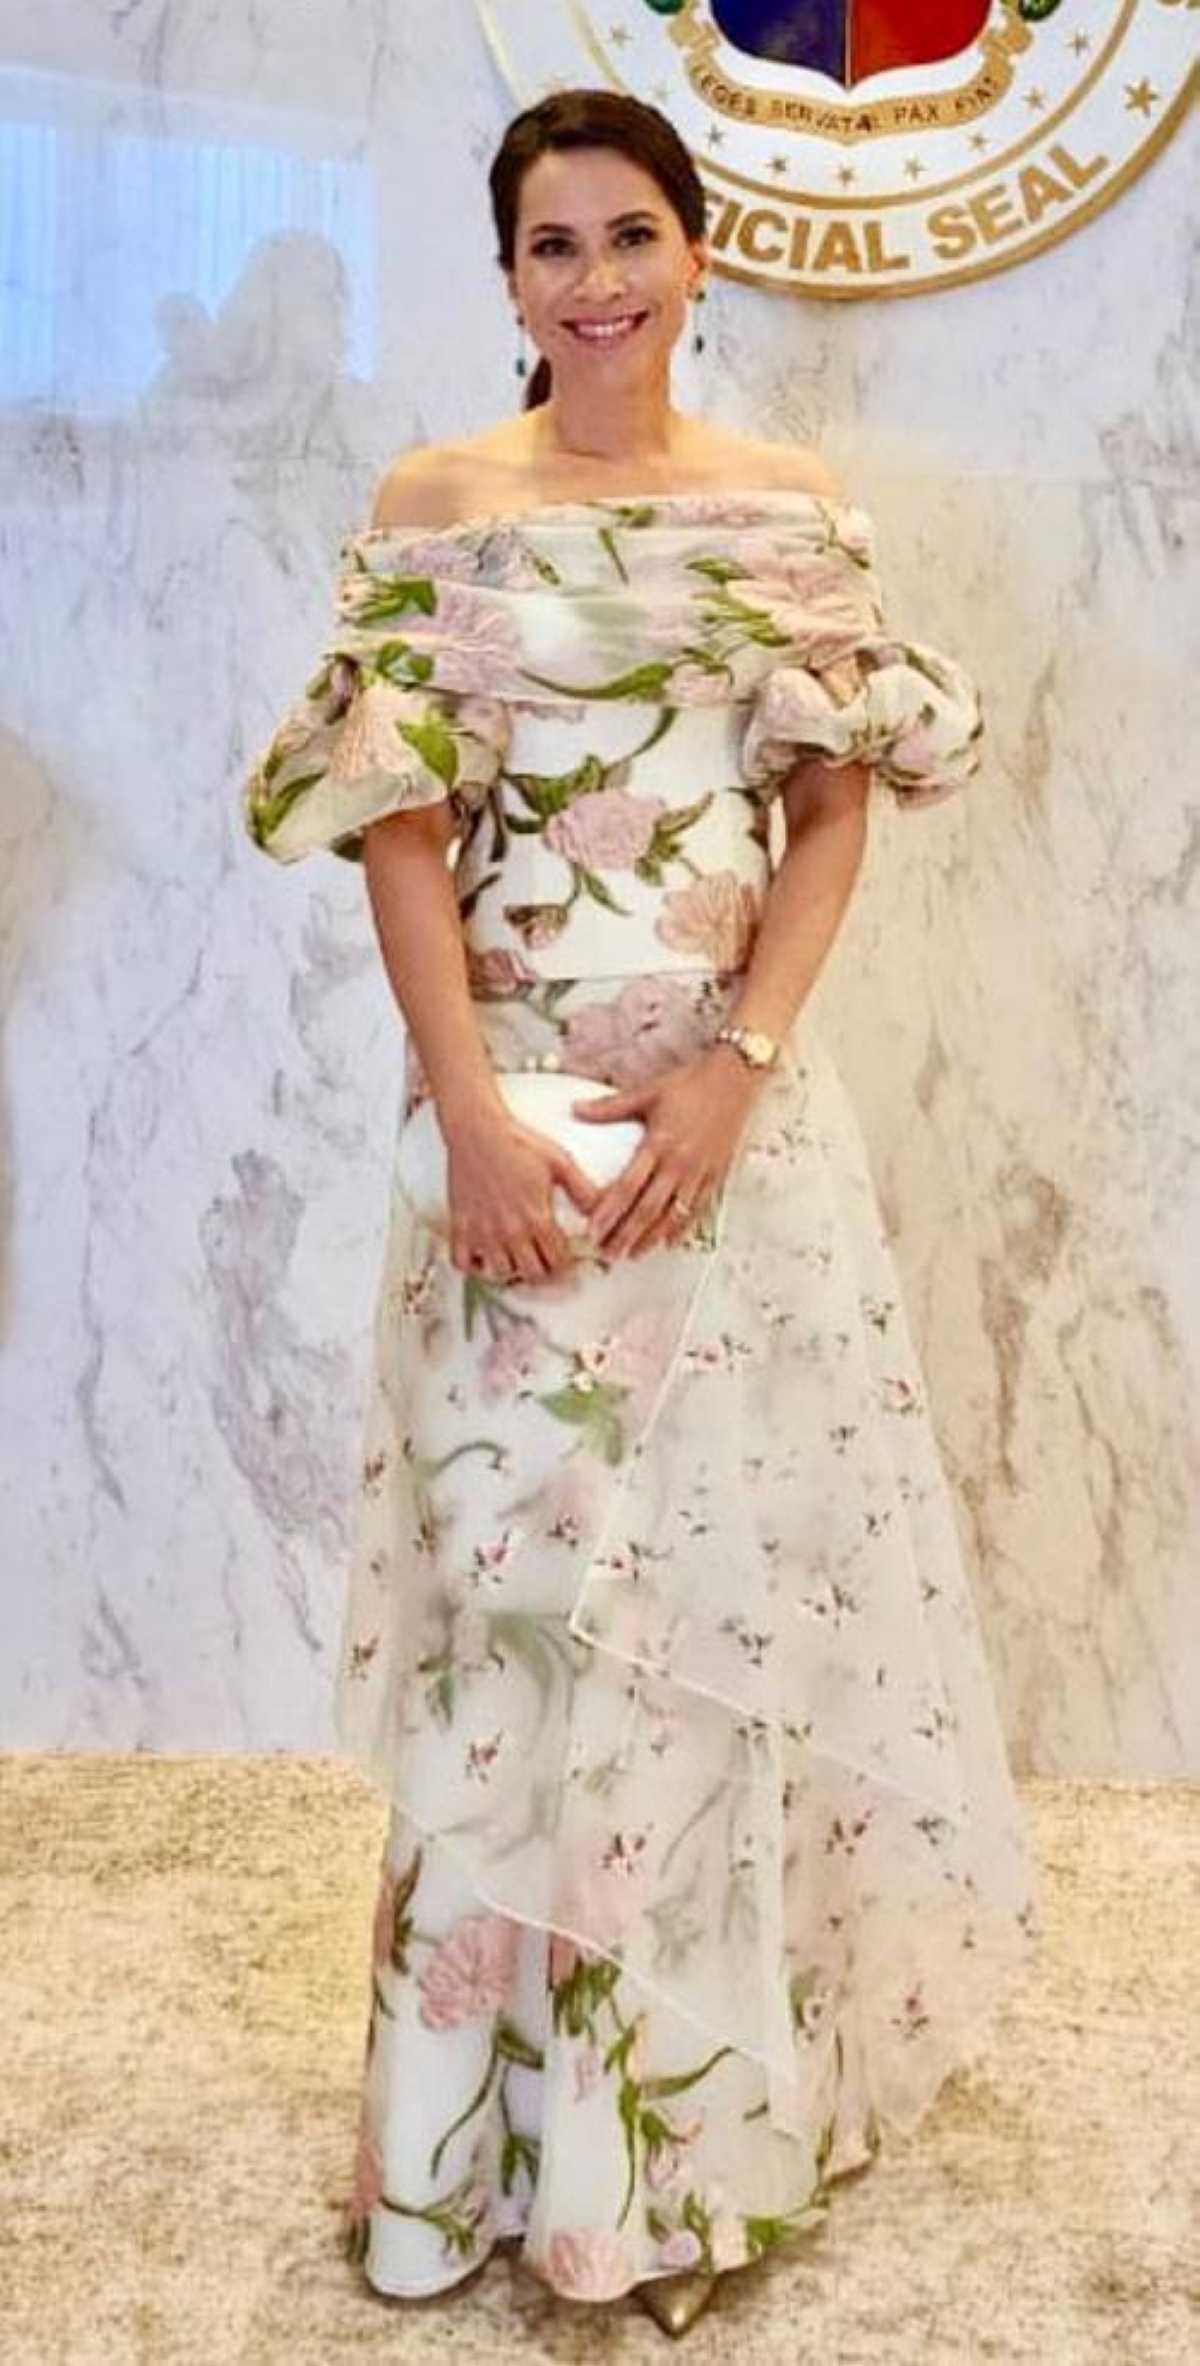 AUDREY TAN-ZUBIRI Consistently in the SONA best-dressed club, Audrey Tan-Zubiri, wife of Senate President Miguel Zubiri, joins this year’s floral Filipiniana trend in an off-the-shoulder gown by Rajo Laurel. The celebrated Filipino couturier names his charming creation “Panuelo and Tapis,” elaborating on Instagram that it is “a mix of patterns and embroidery for a contemporary take on the Filipiniana.” Tan-Zubiri completes the look with minimal accessories – slim and elegant dangling earrings, a lady’s dress watch, and an oval clutch bag from Beatriz. INSTAGRAM PHOTO/AUDREYTANZUBIRI